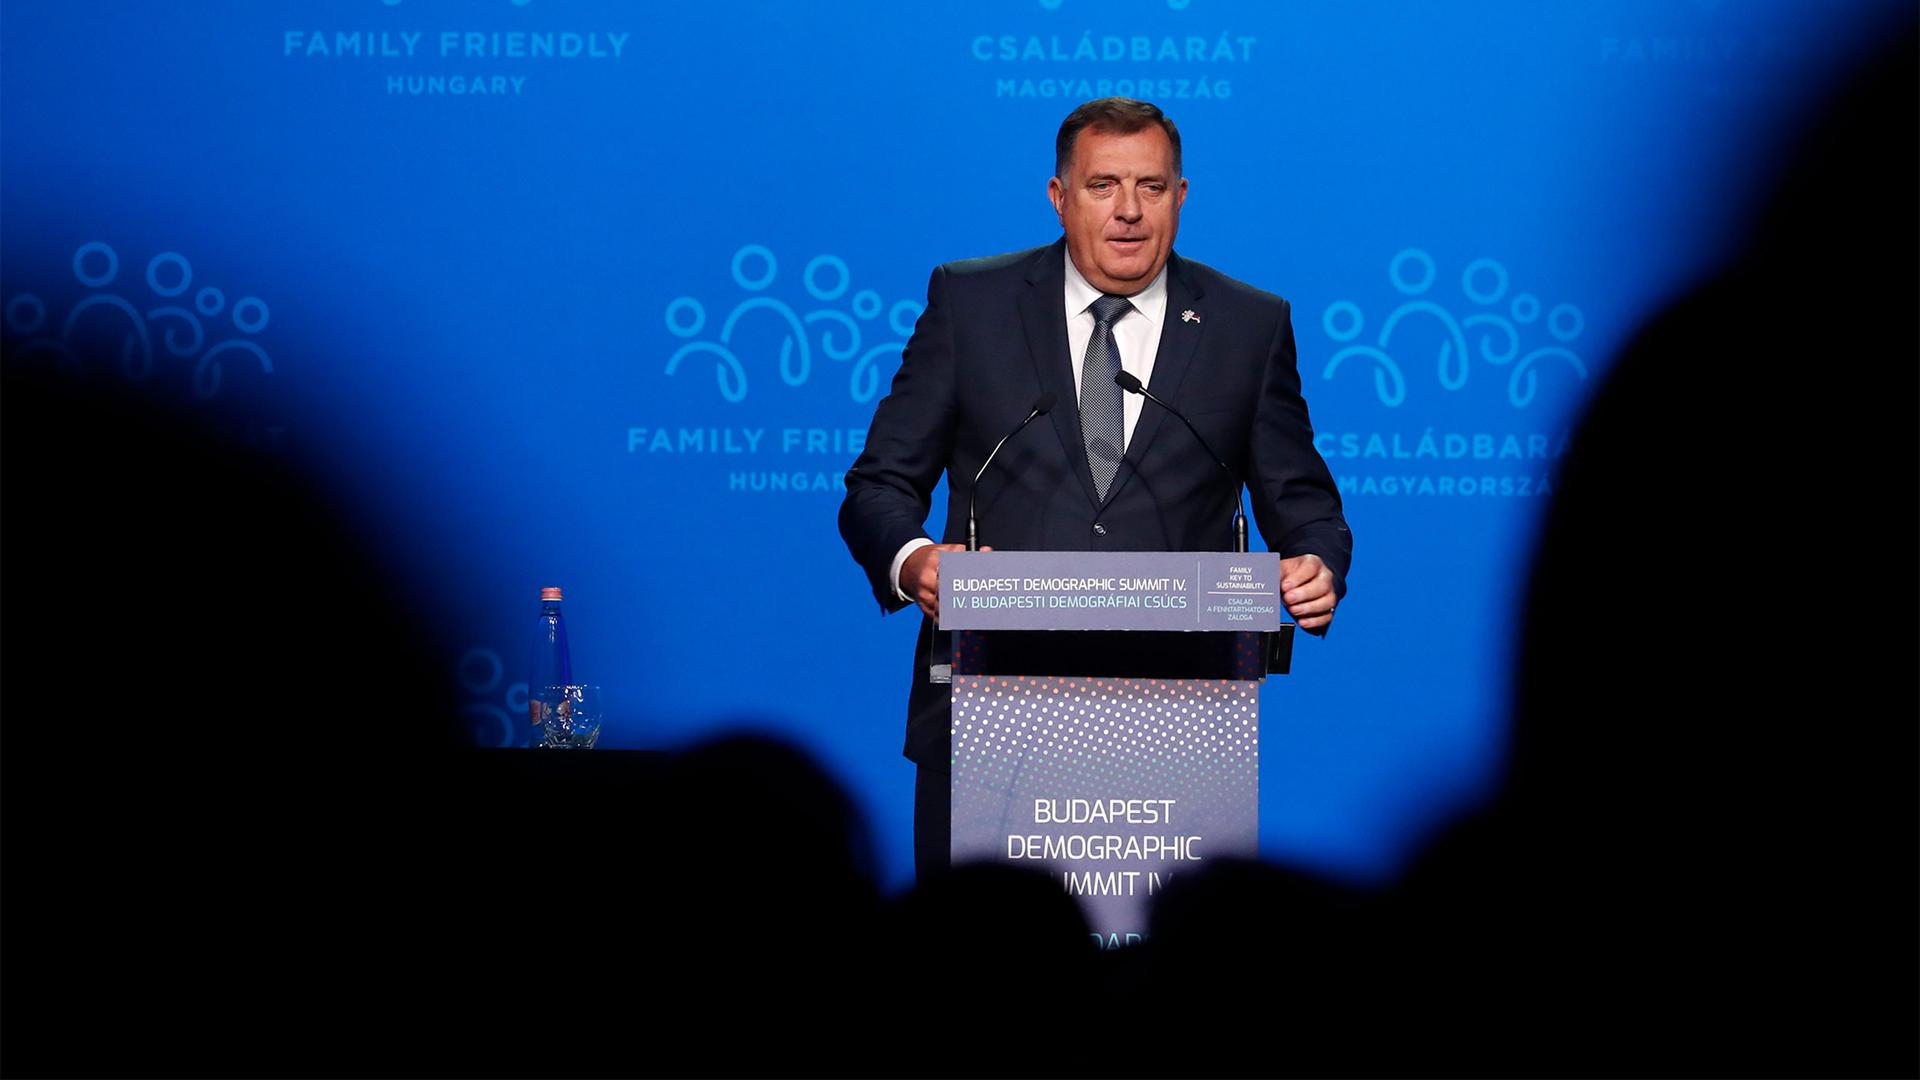 Bosnian Serb member of the tripartite Presidency of Bosnia Milorad Dodik holds a speech during the 4th Budapest Demographic Summit in Budapest, Hungary